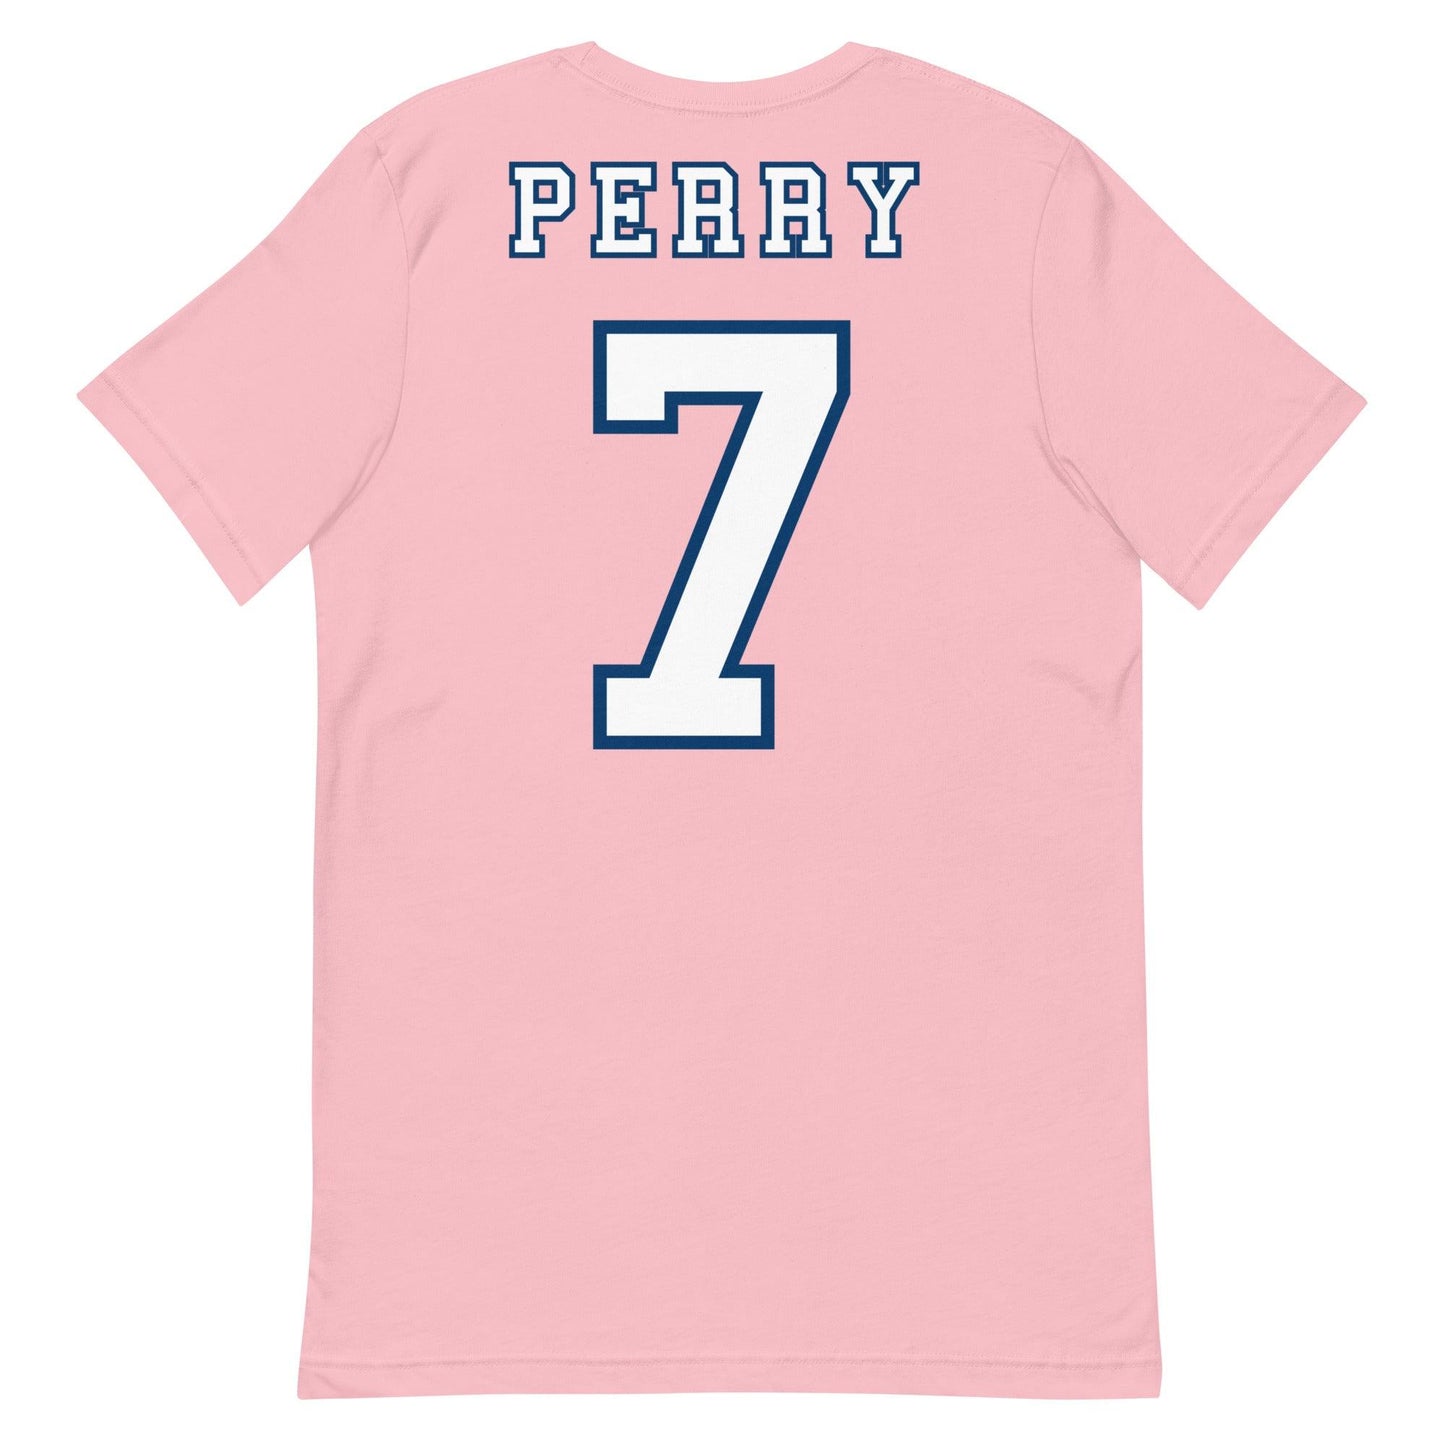 N'Kosi Perry "Jersey" t-shirt - Fan Arch